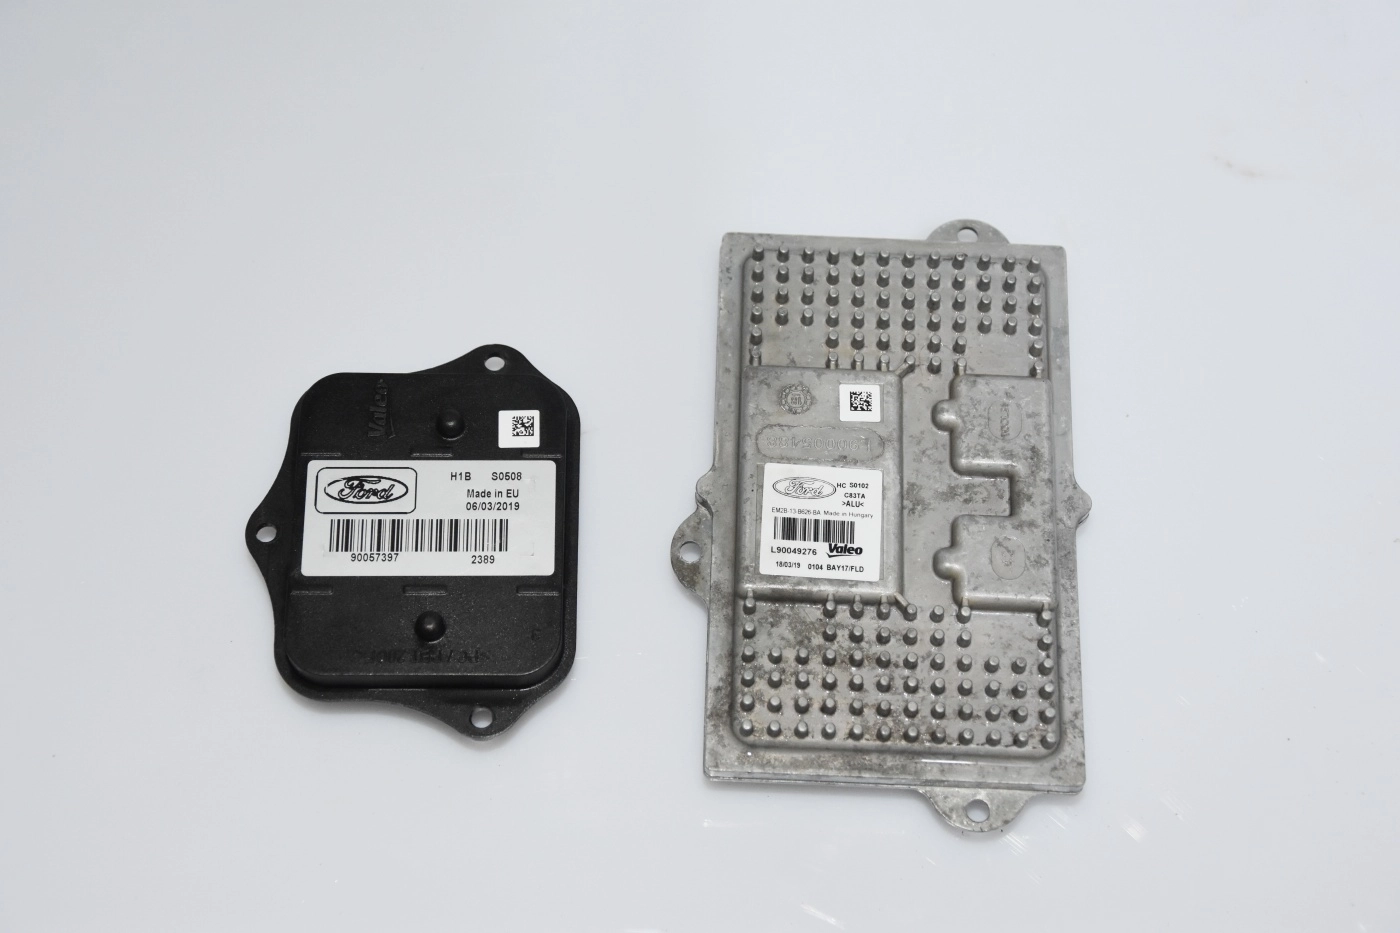 ford rj pro afs system 90057397